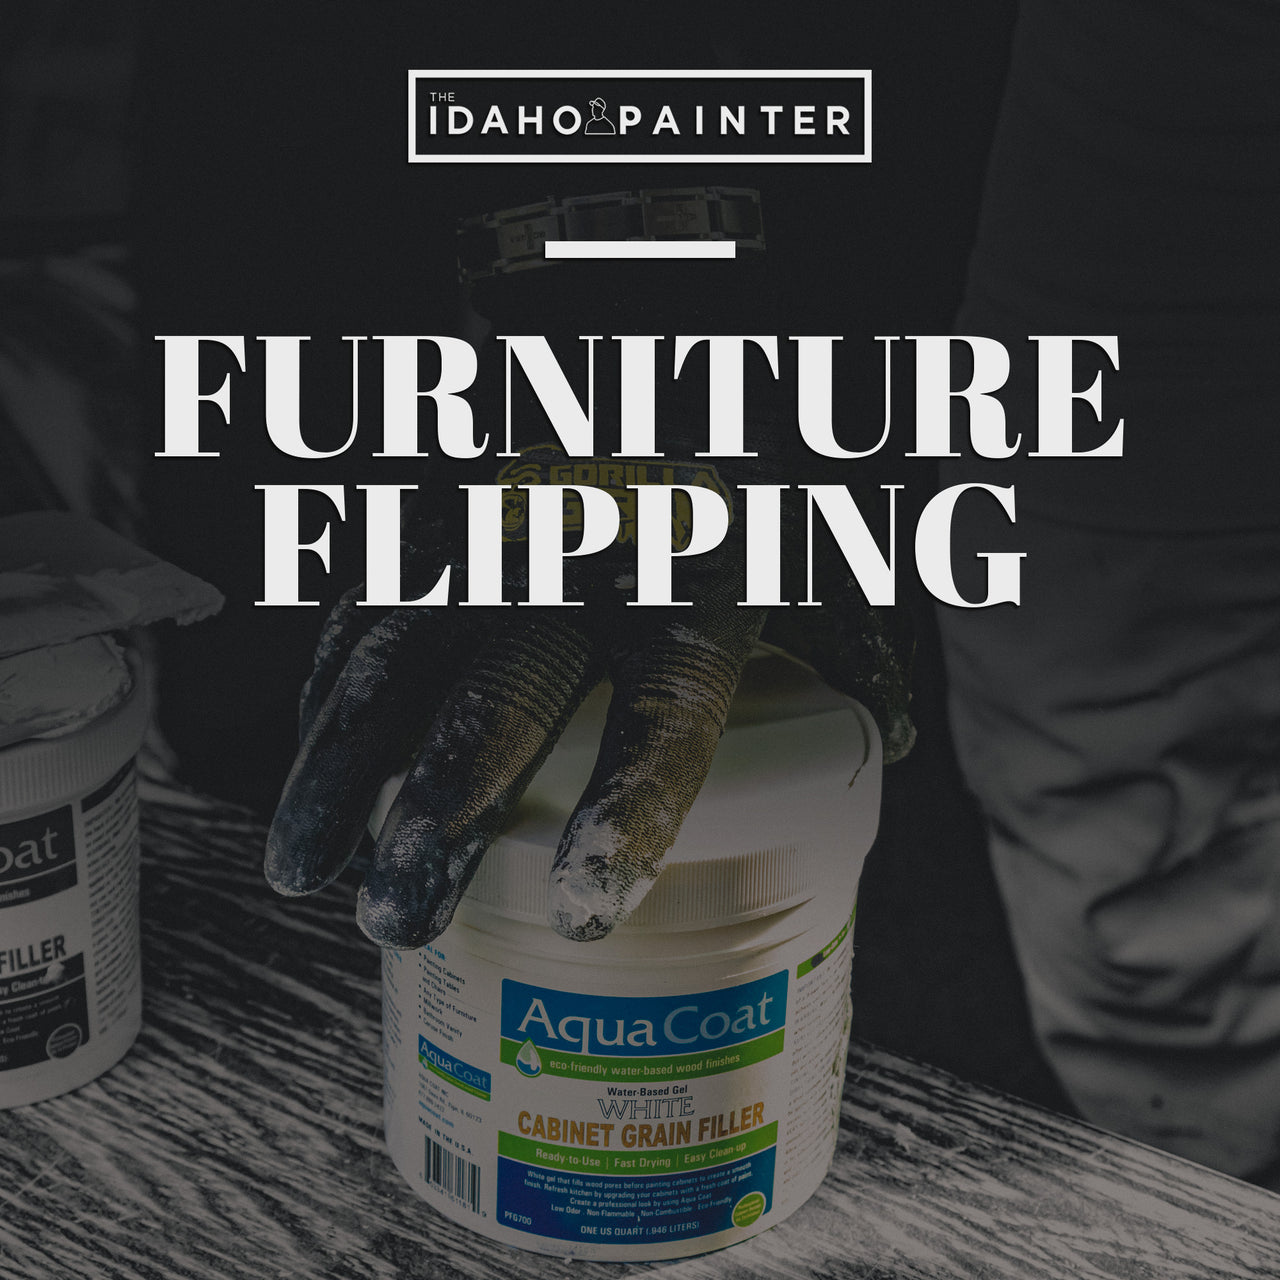 Furniture Flipping Course